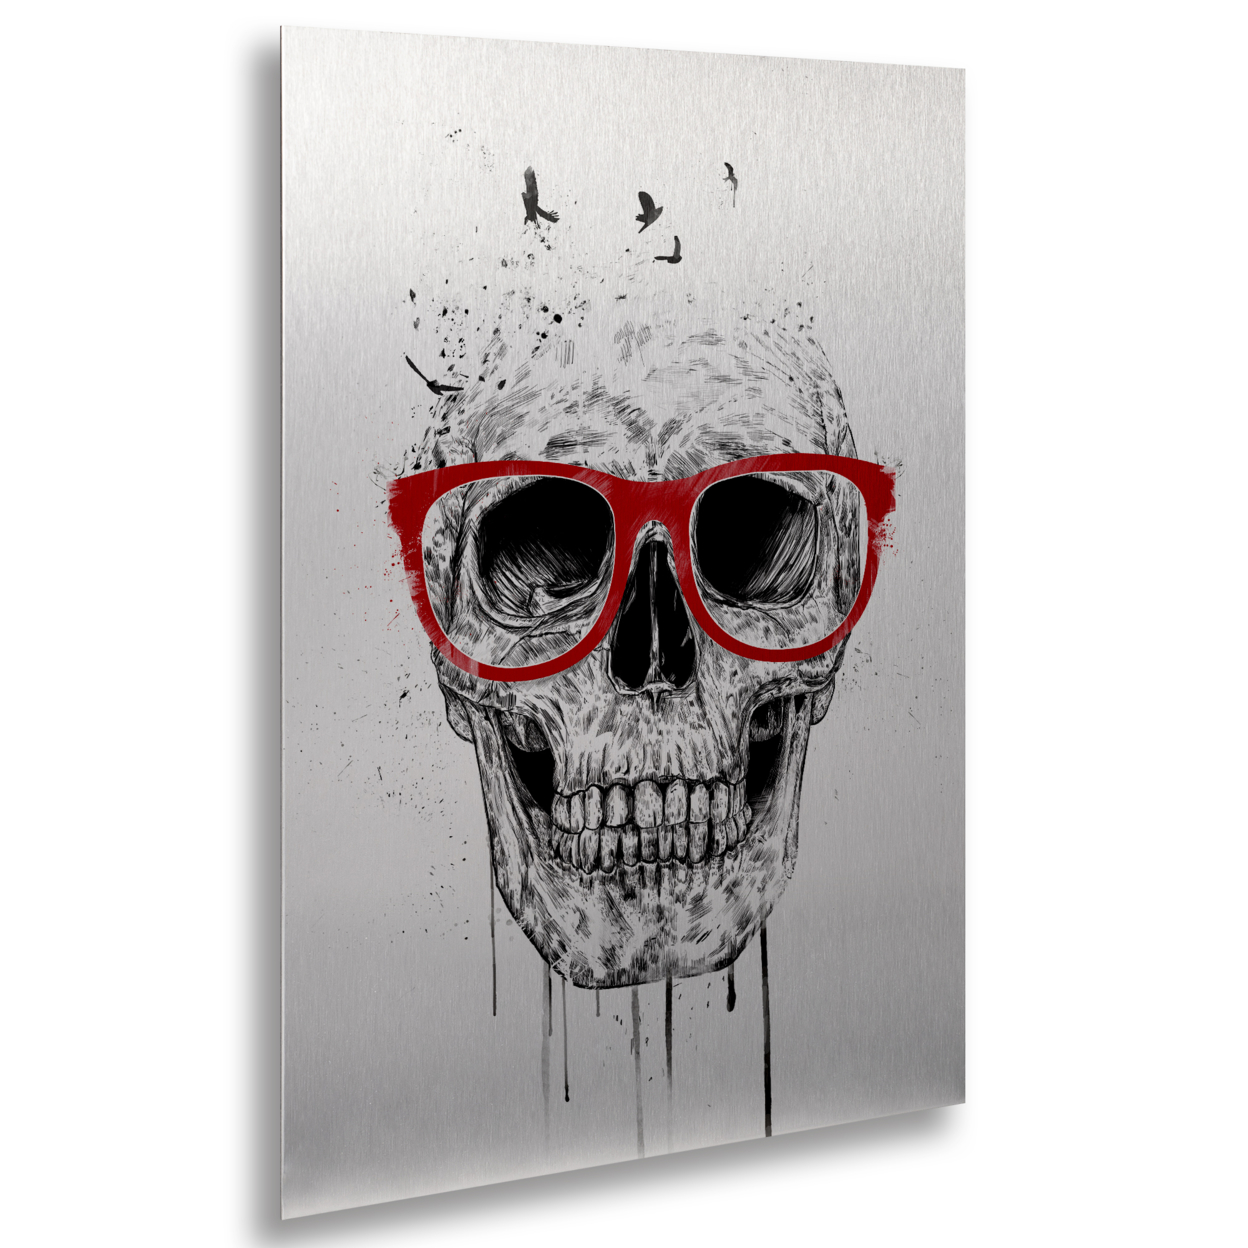 Balazs Solti 'Skull With Red Glasses' Floating Brushed Aluminum Art 16 X 22